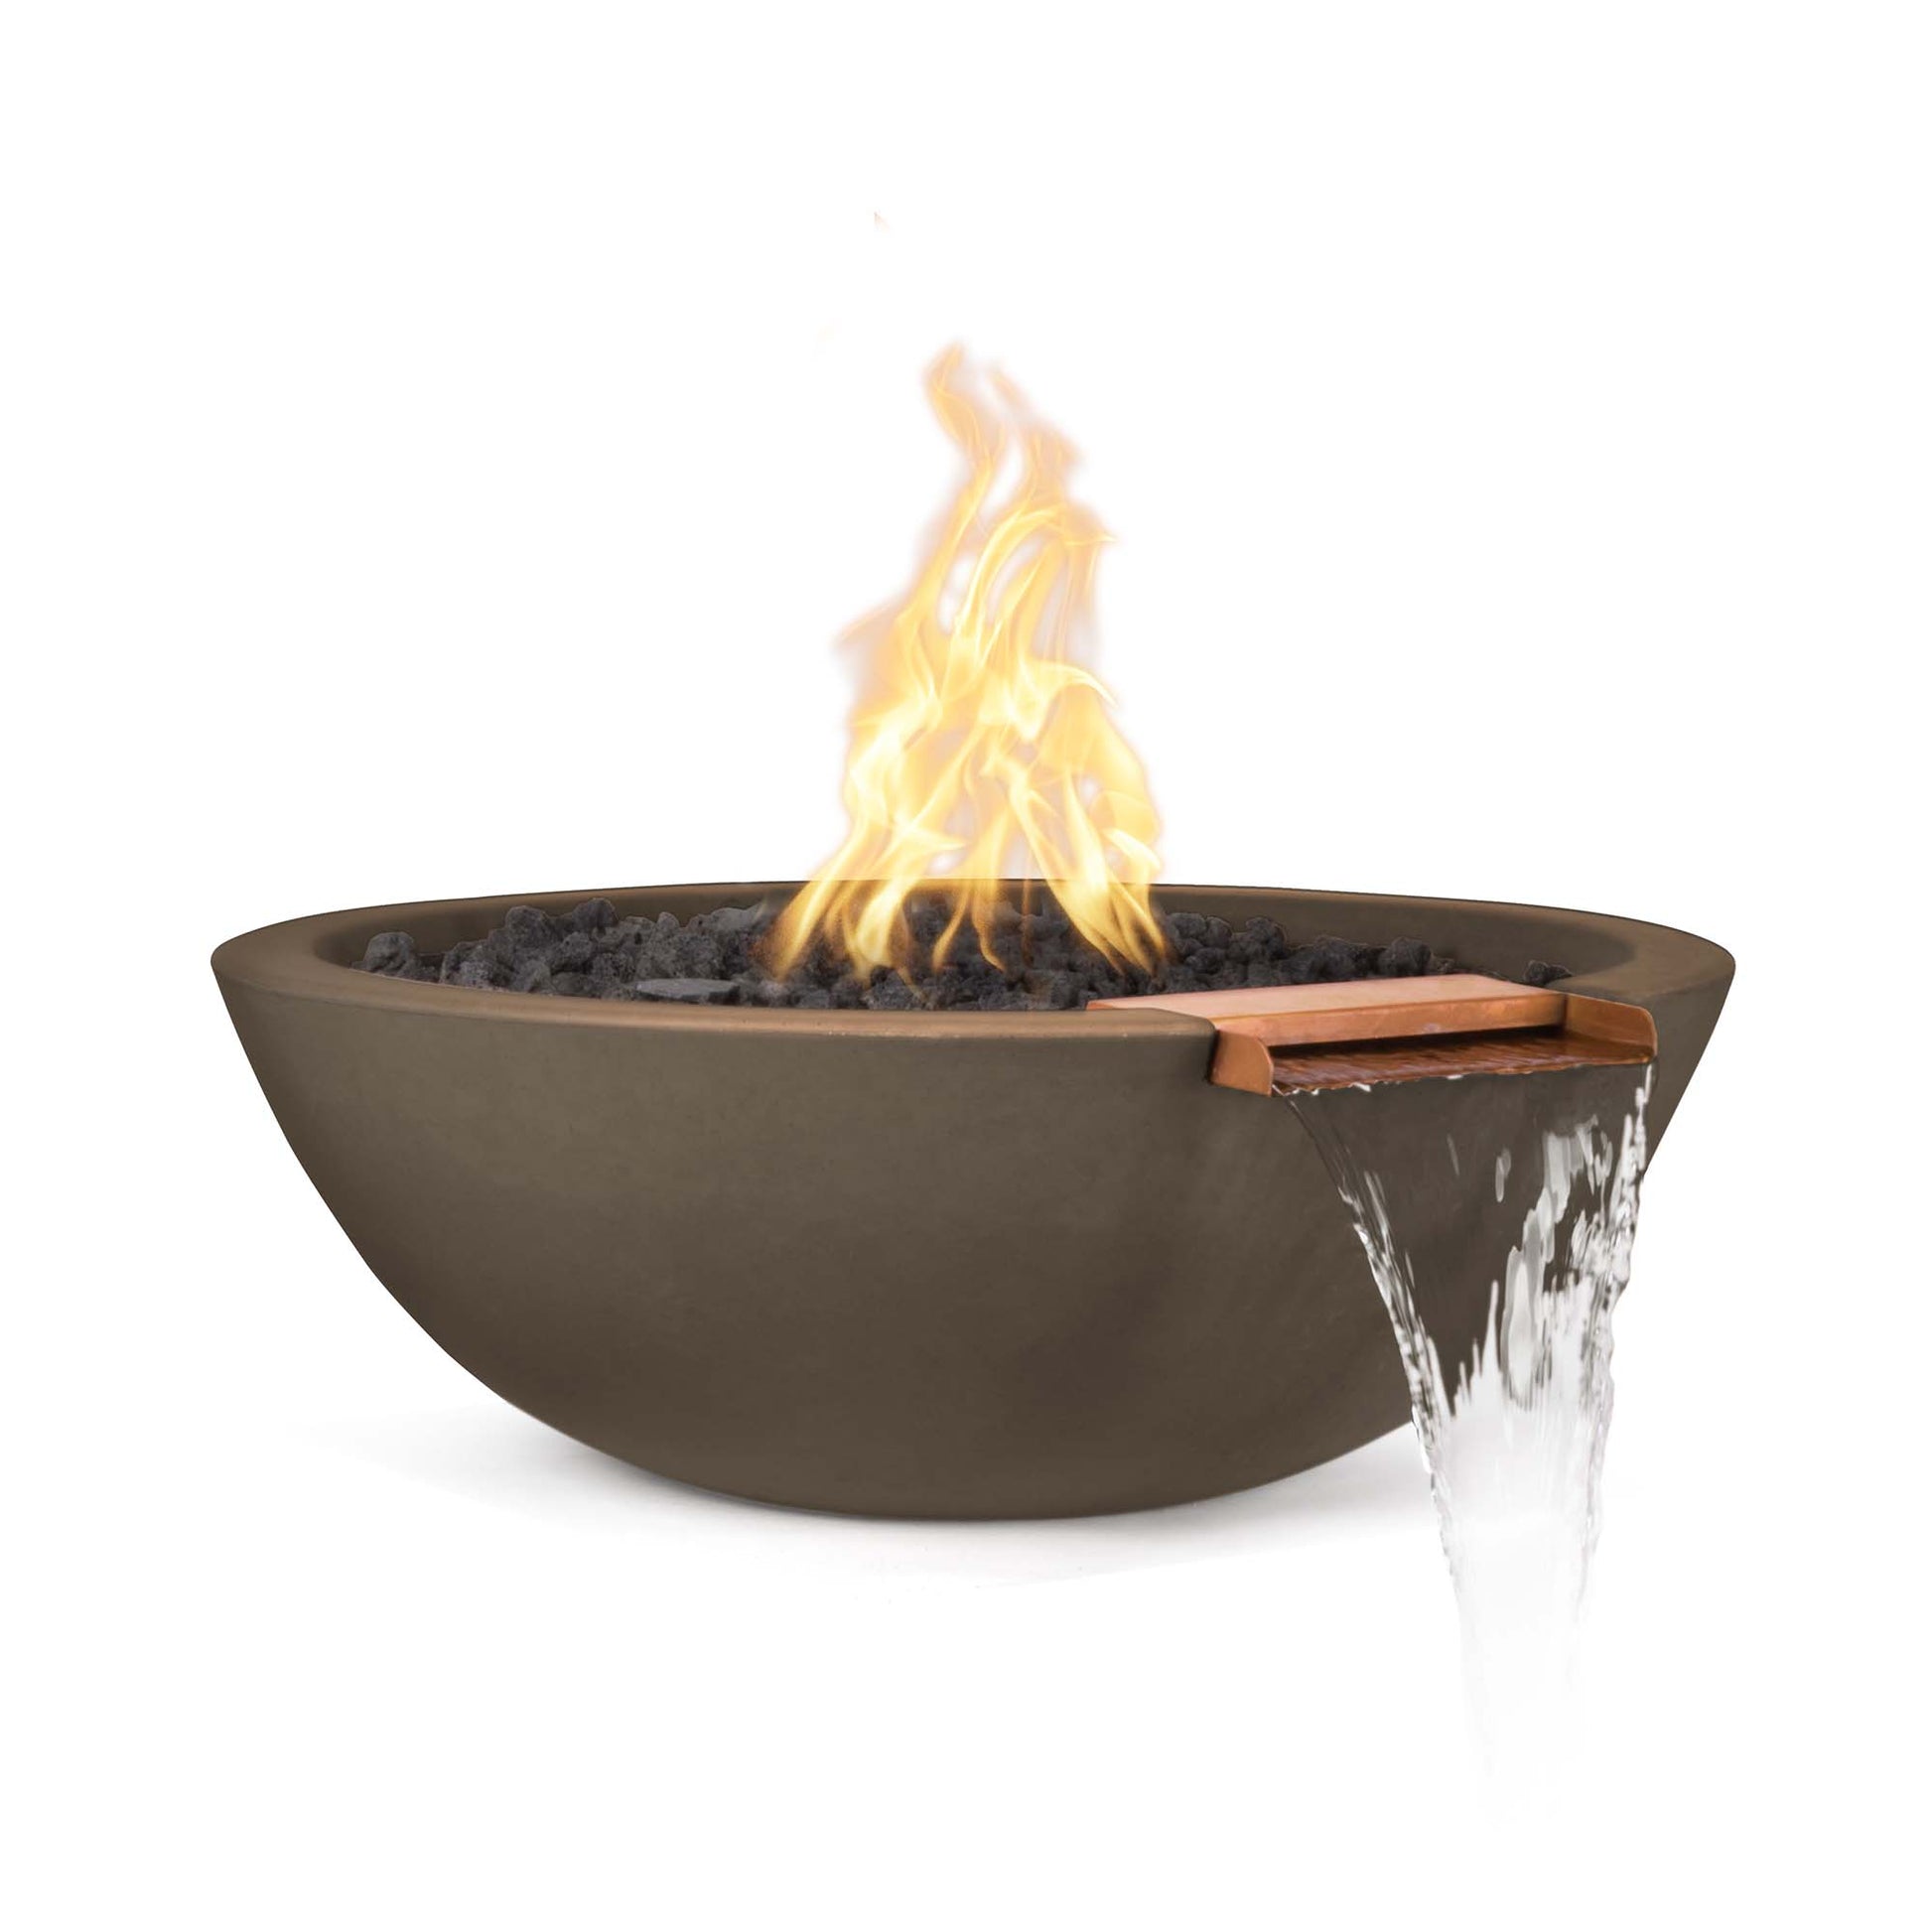 The Outdoor Plus Round Sedona 33" Metallic Slate GFRC Concrete Liquid Propane Fire & Water Bowl with Match Lit with Flame Sense Ignition